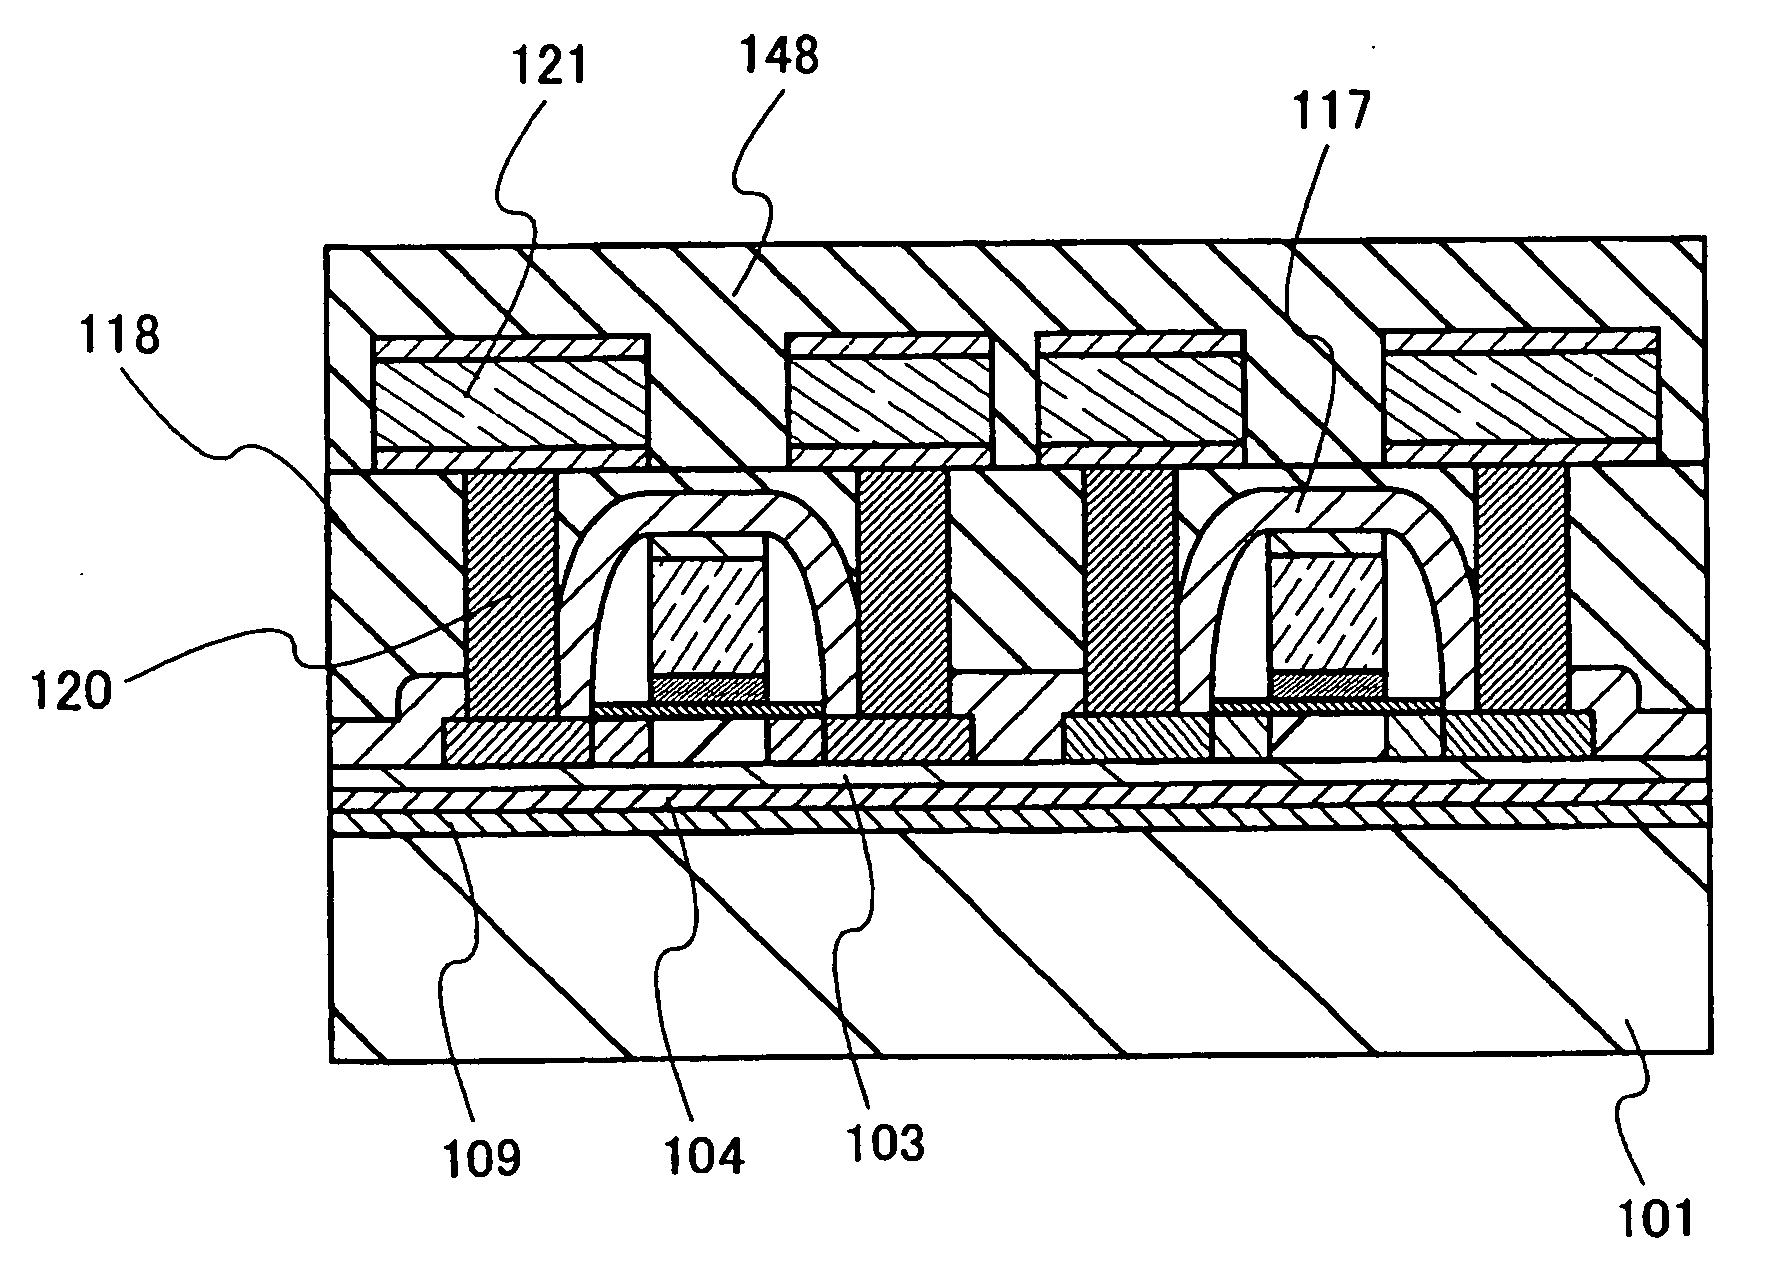 Semiconductor substrate, semiconductor device and manufacturing method thereof